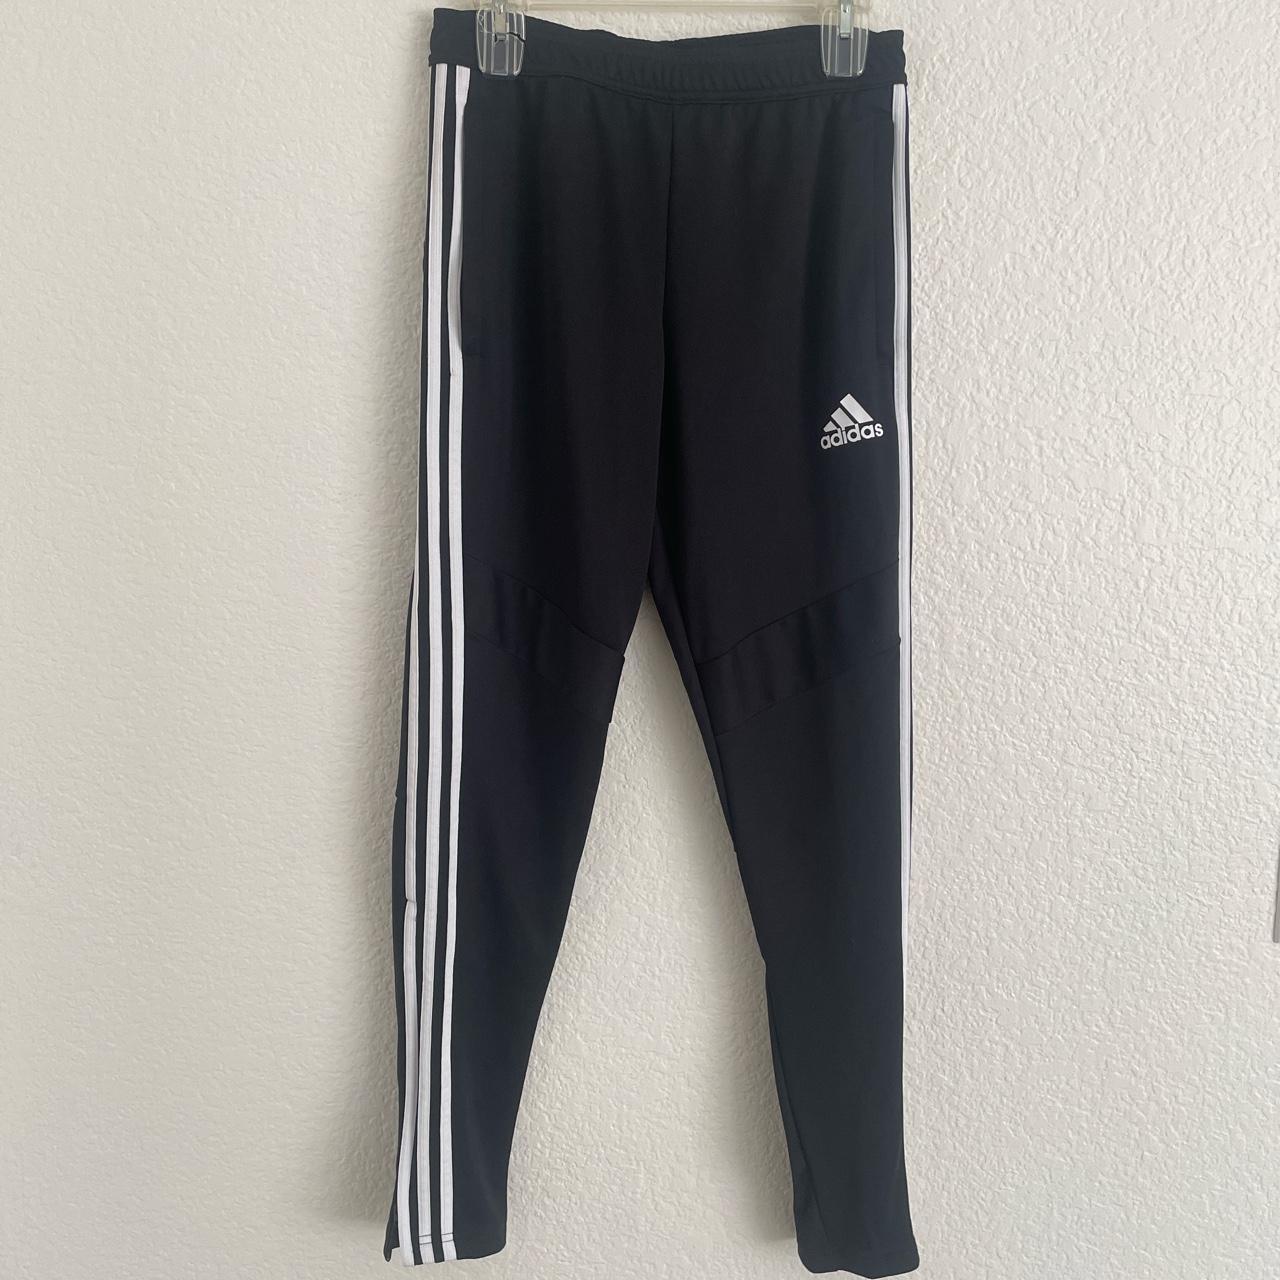 Adidas YOUTH Athletic TIR017 Climacool Soccer Sweat Pants Black White  Medium, Men's Fashion, Bottoms, Joggers on Carousell